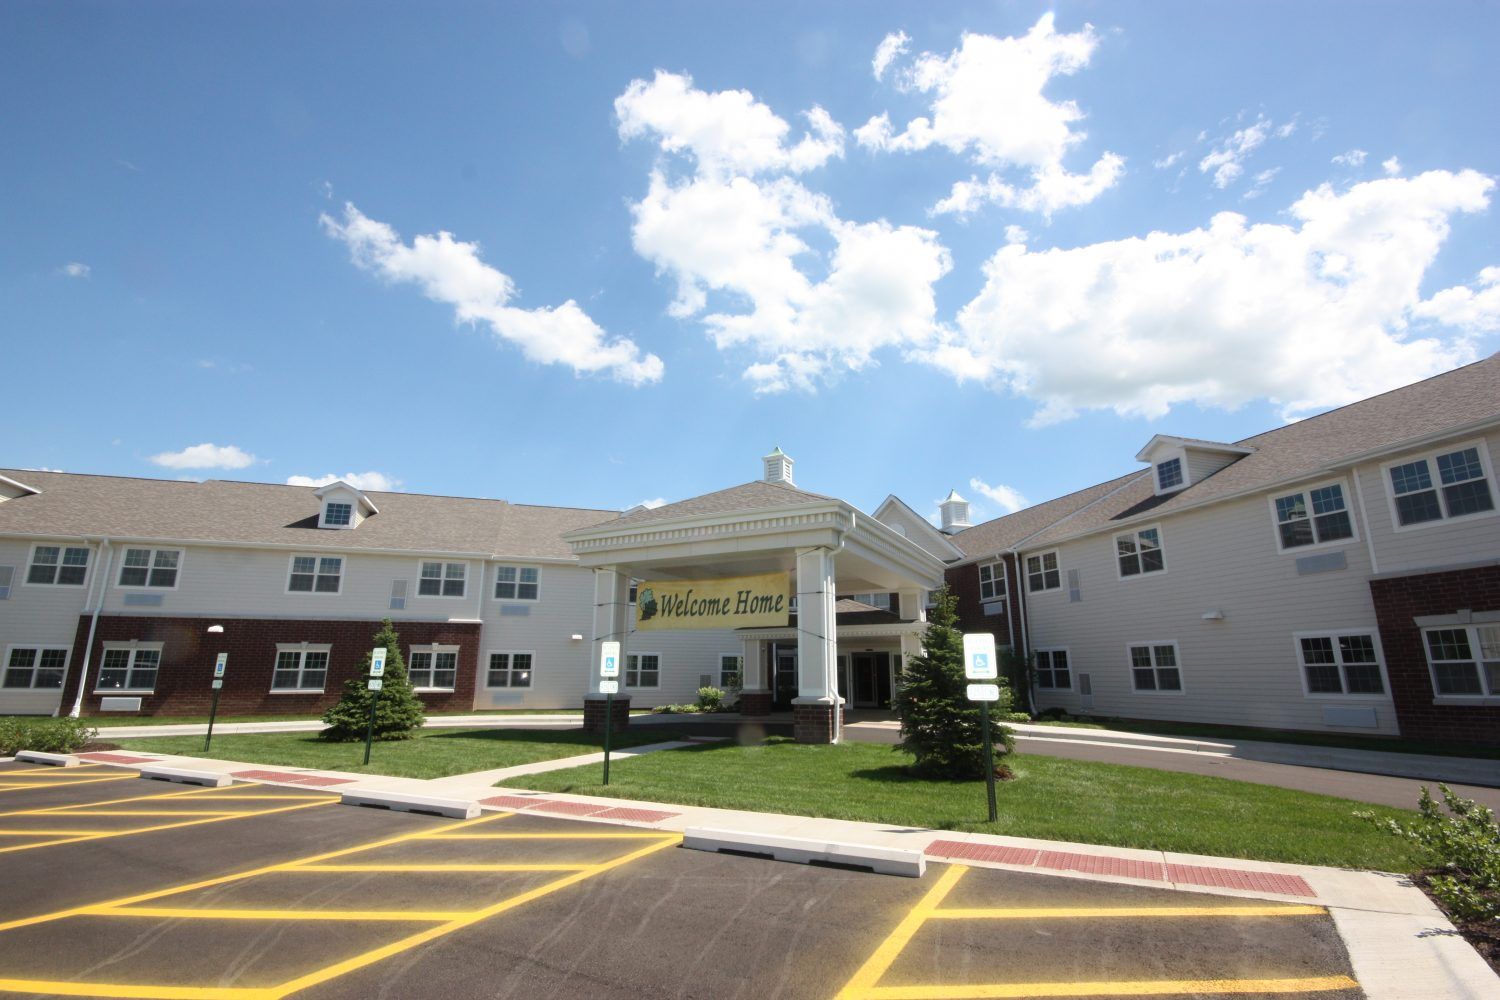 Heritage Woods of Freeport senior living community with urban condos, office buildings, and school.